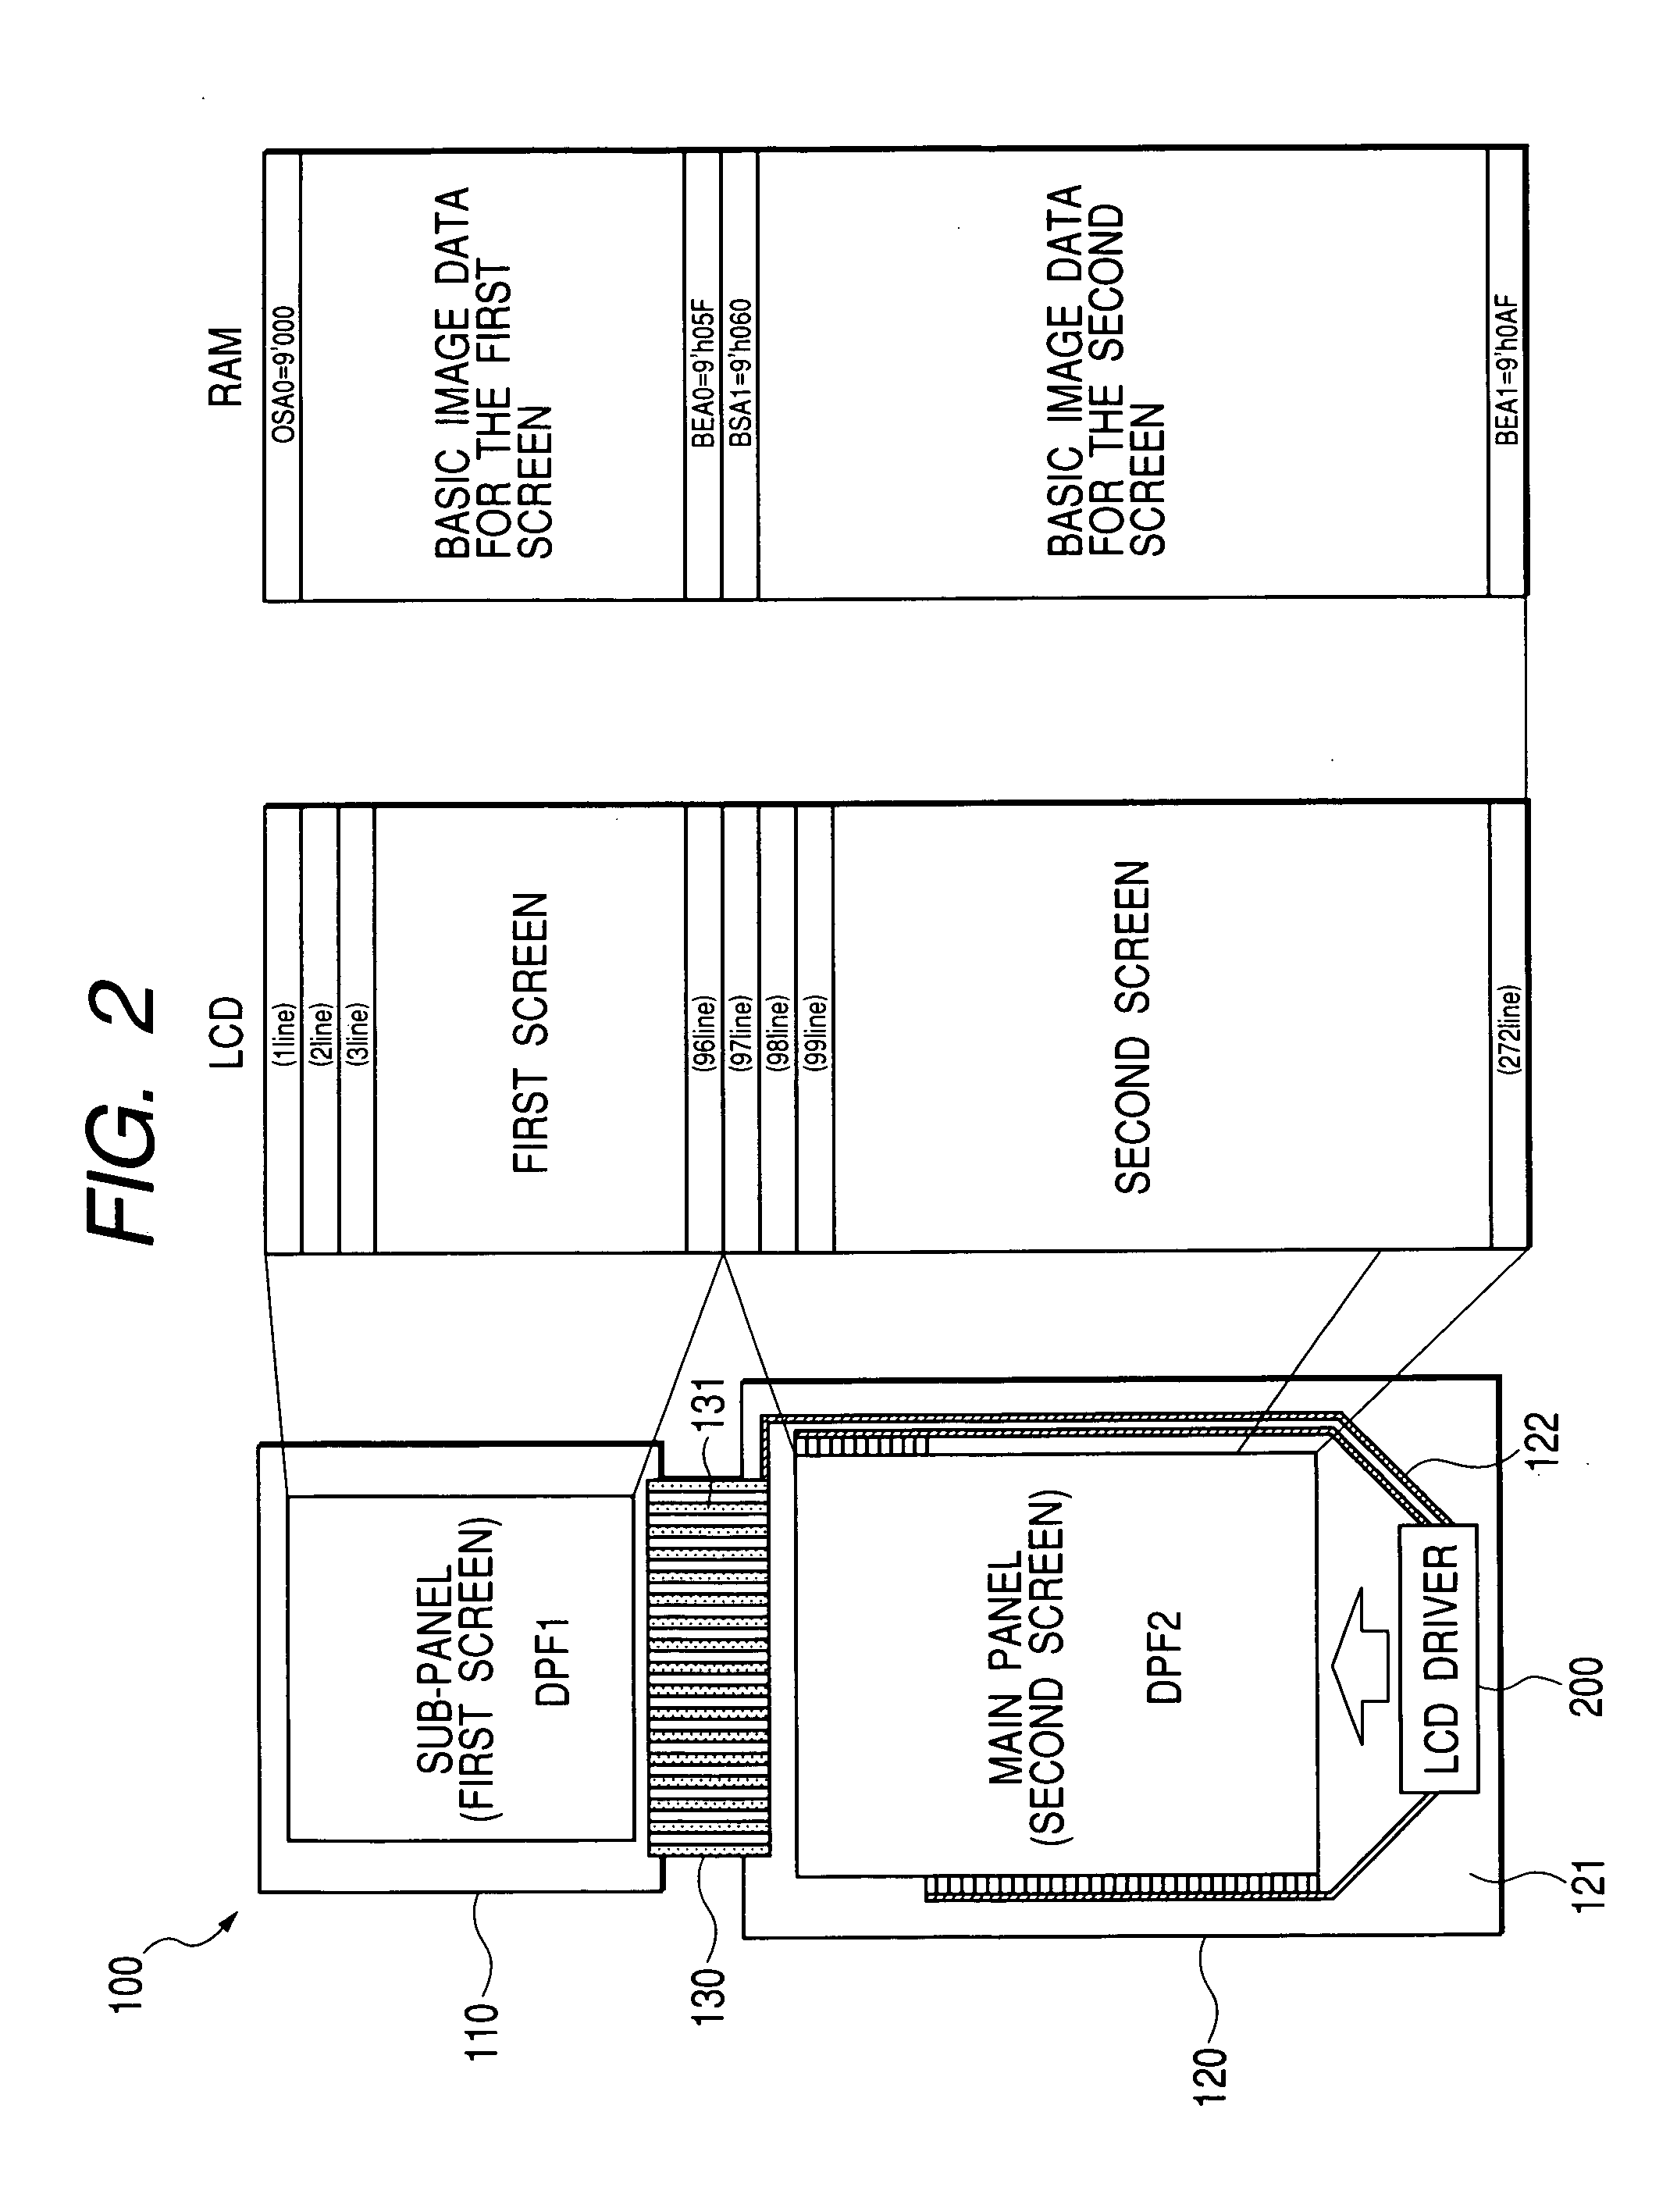 Display drive control device and electric device including display device